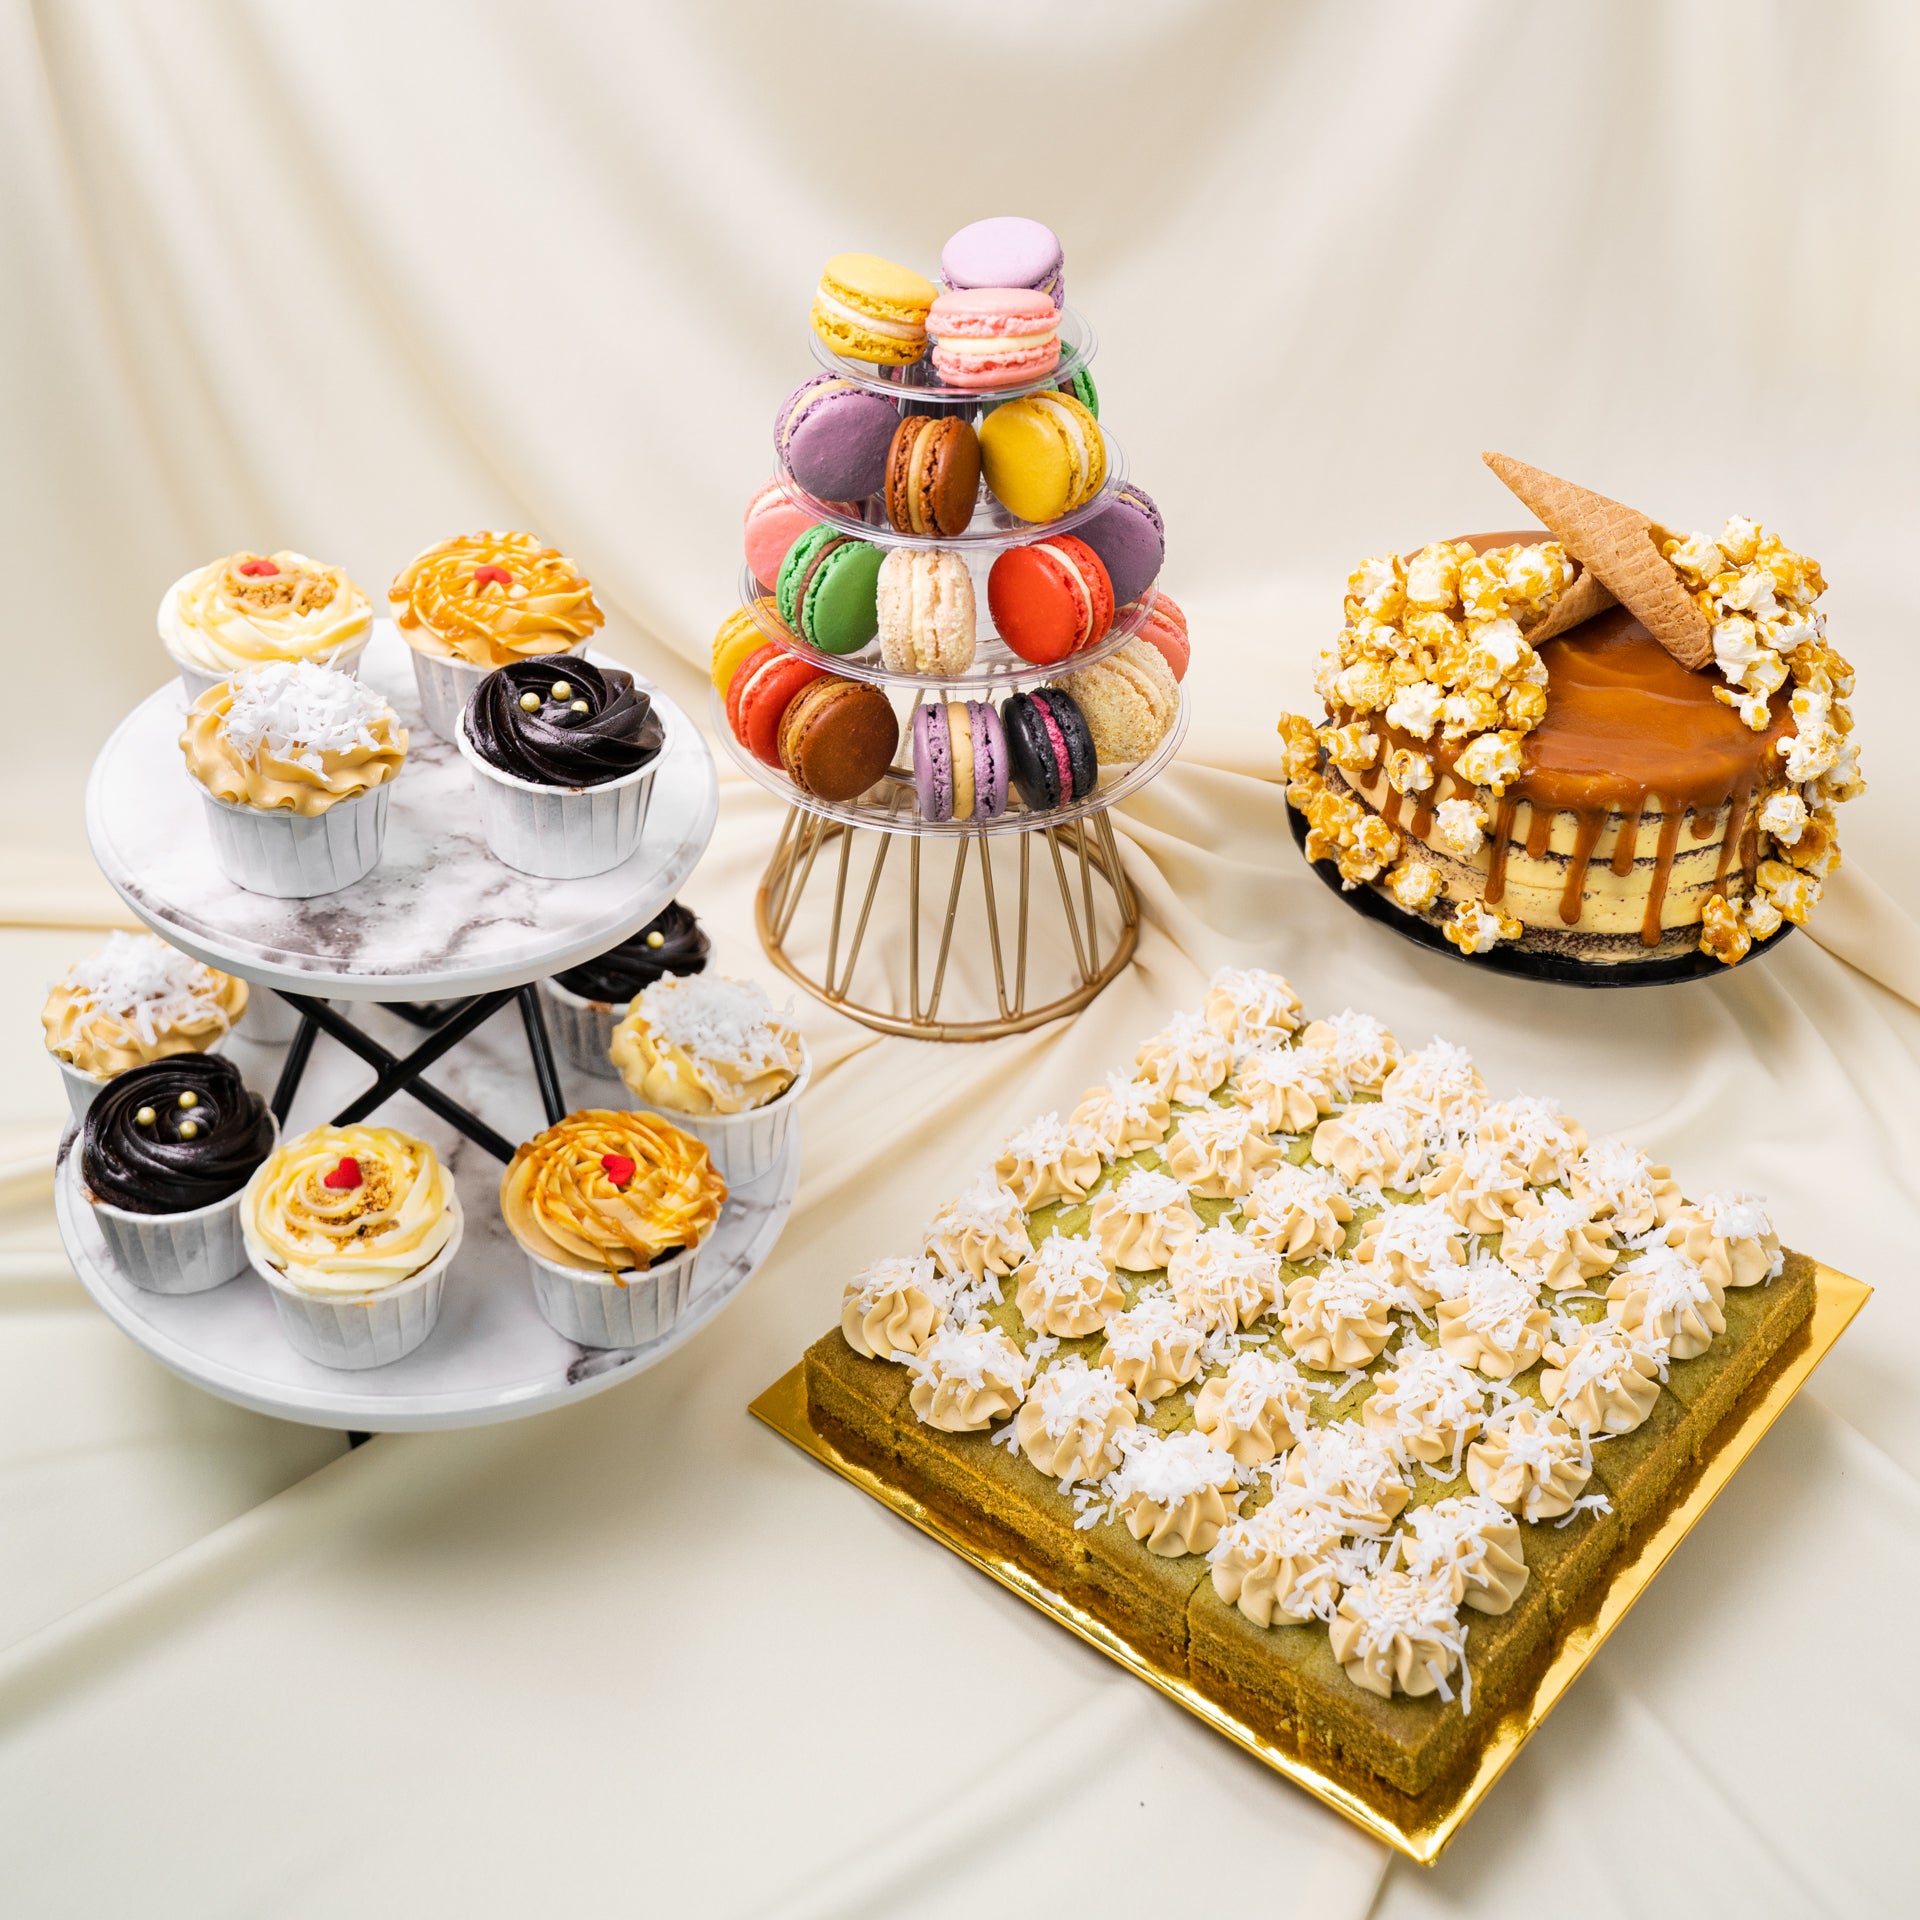 Dessert Table package including a square The Locale Pandan Gula Melaka Cake Cake Bites, 7 inch Signature Popstar Cake, Tower of 25 Assorted Macarons and 12 Mix & Match Cupcakes displayed on a dessert stand